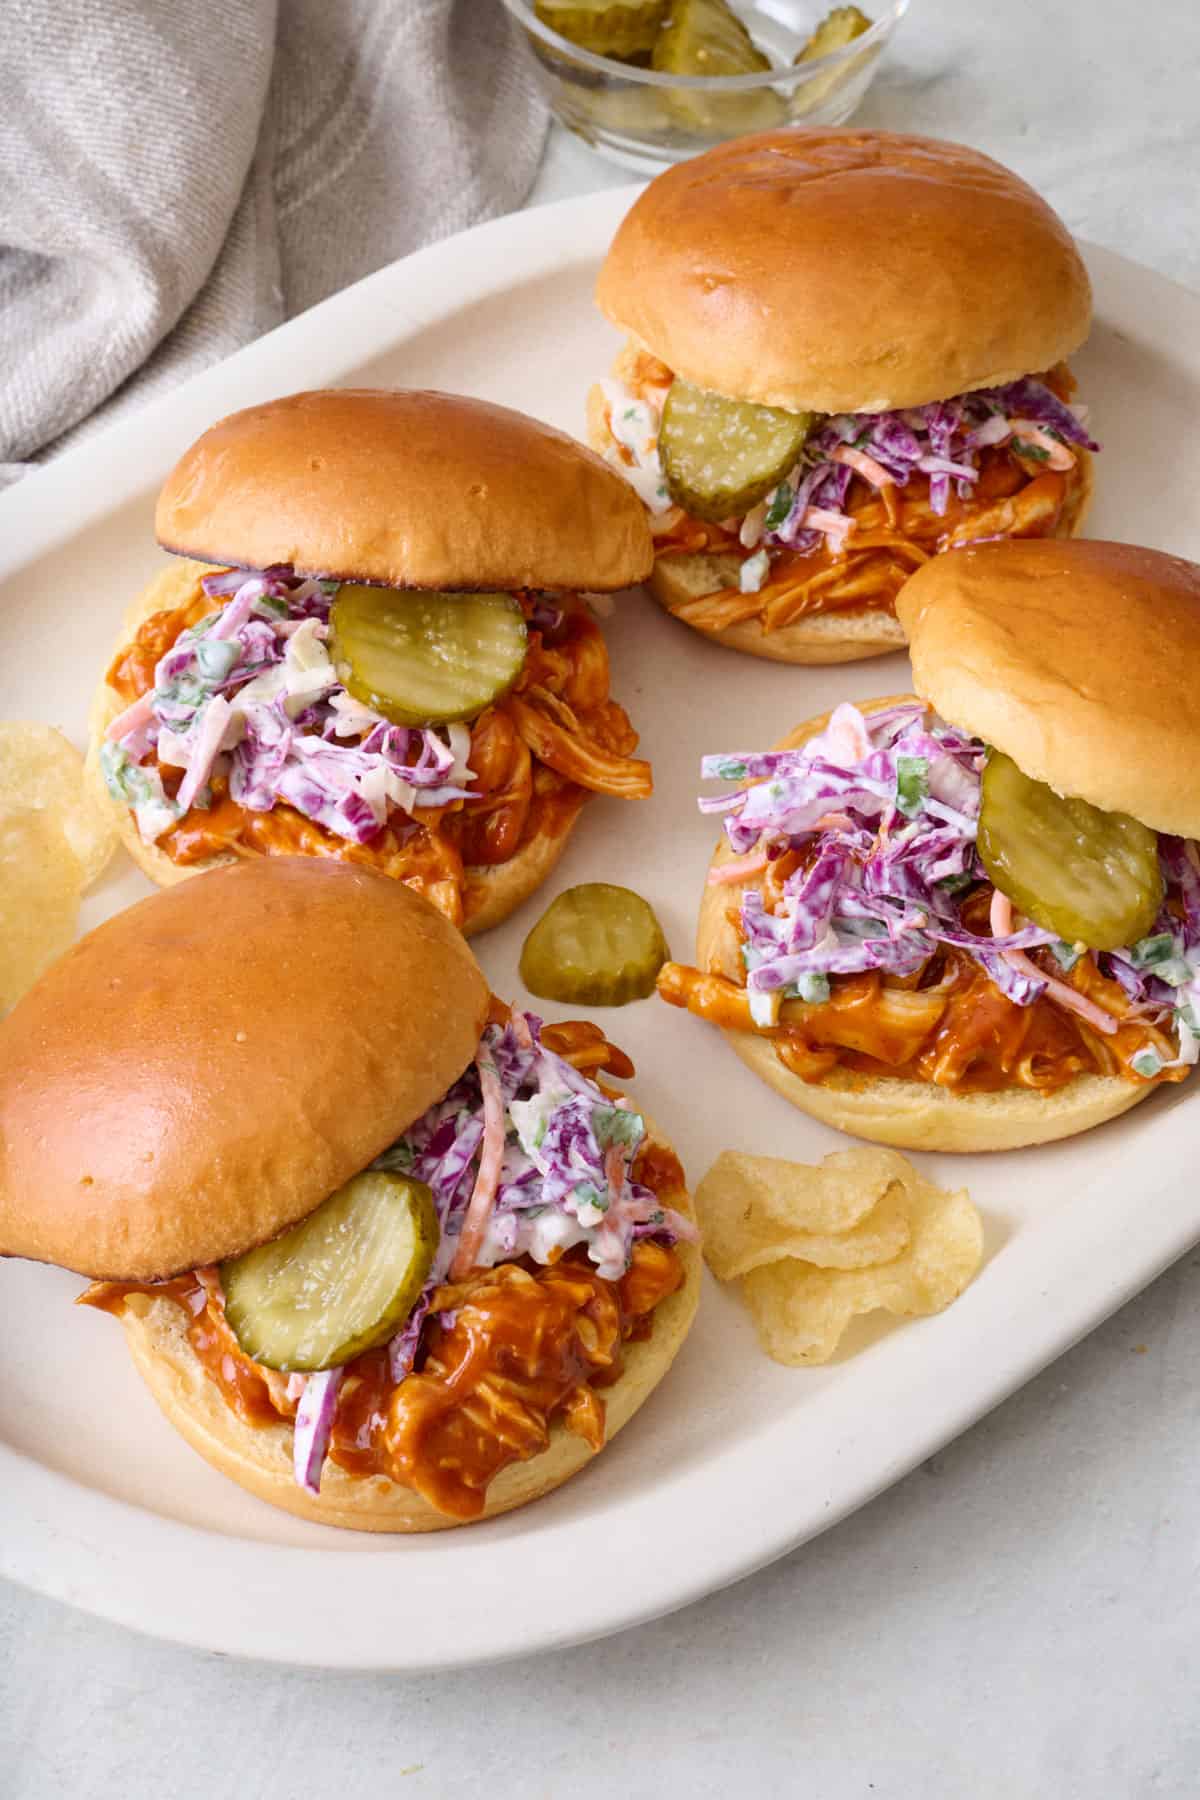 Four bbq chicken sandwiches on a platter, topped with a homemade coleslaw.